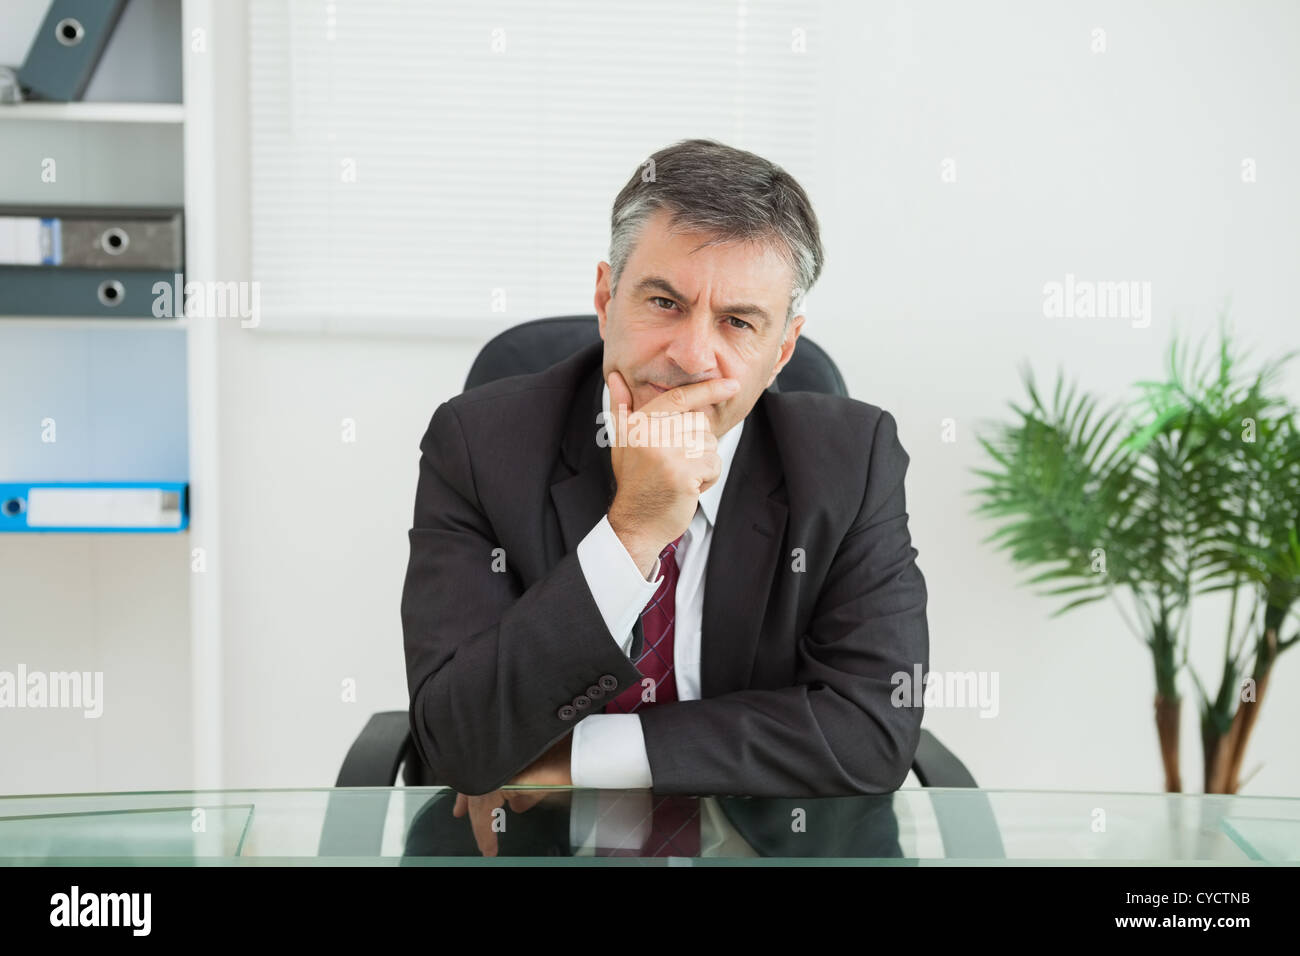 Businessman looking thoughtfully Stock Photo